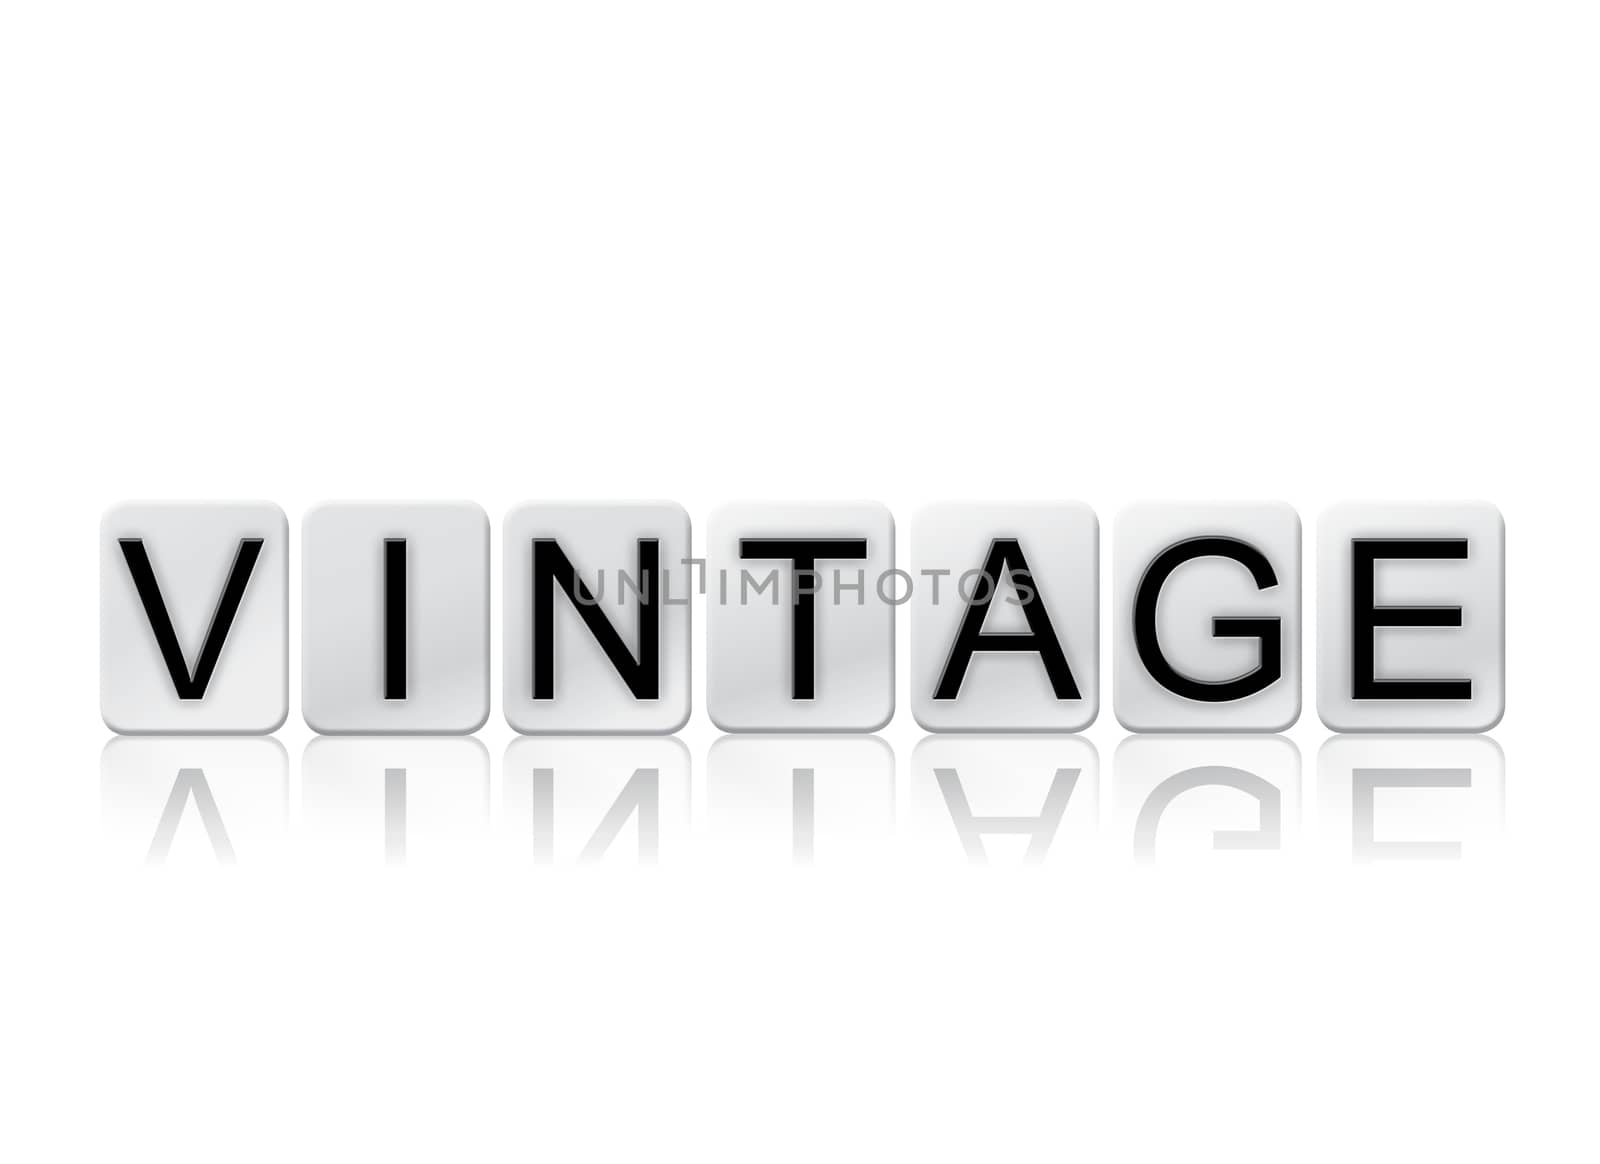 The word "Vintage" written in tile letters isolated on a white background.